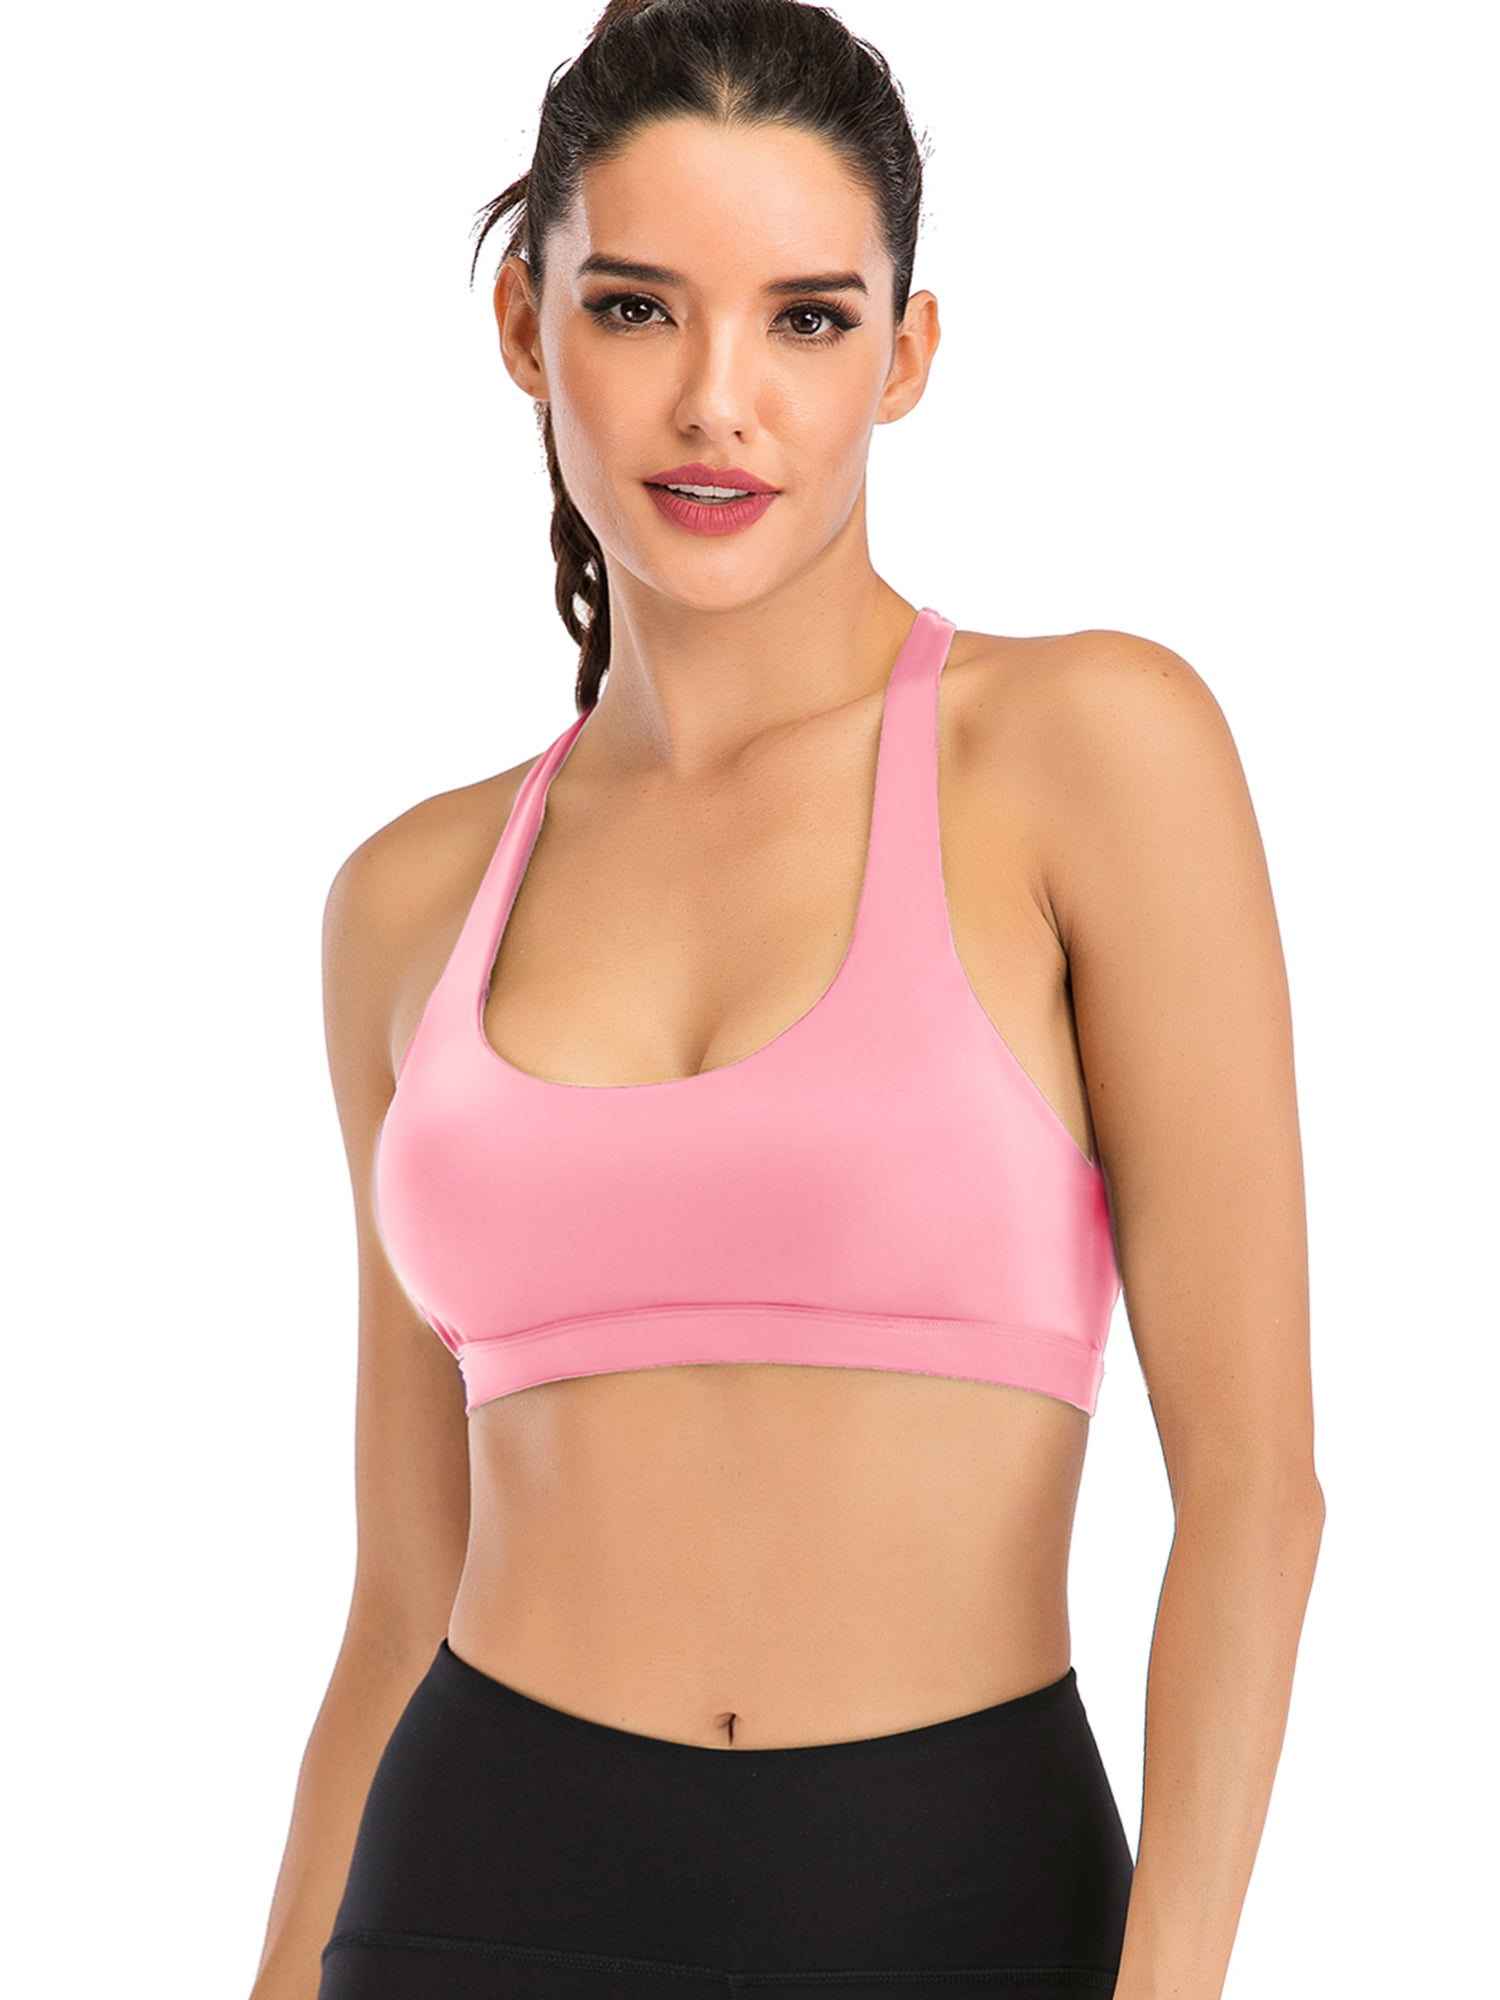 Womens Removable Padded Sports Bras Medium Support Workout Yoga Bra Sexy Cross Strappy Wirefree